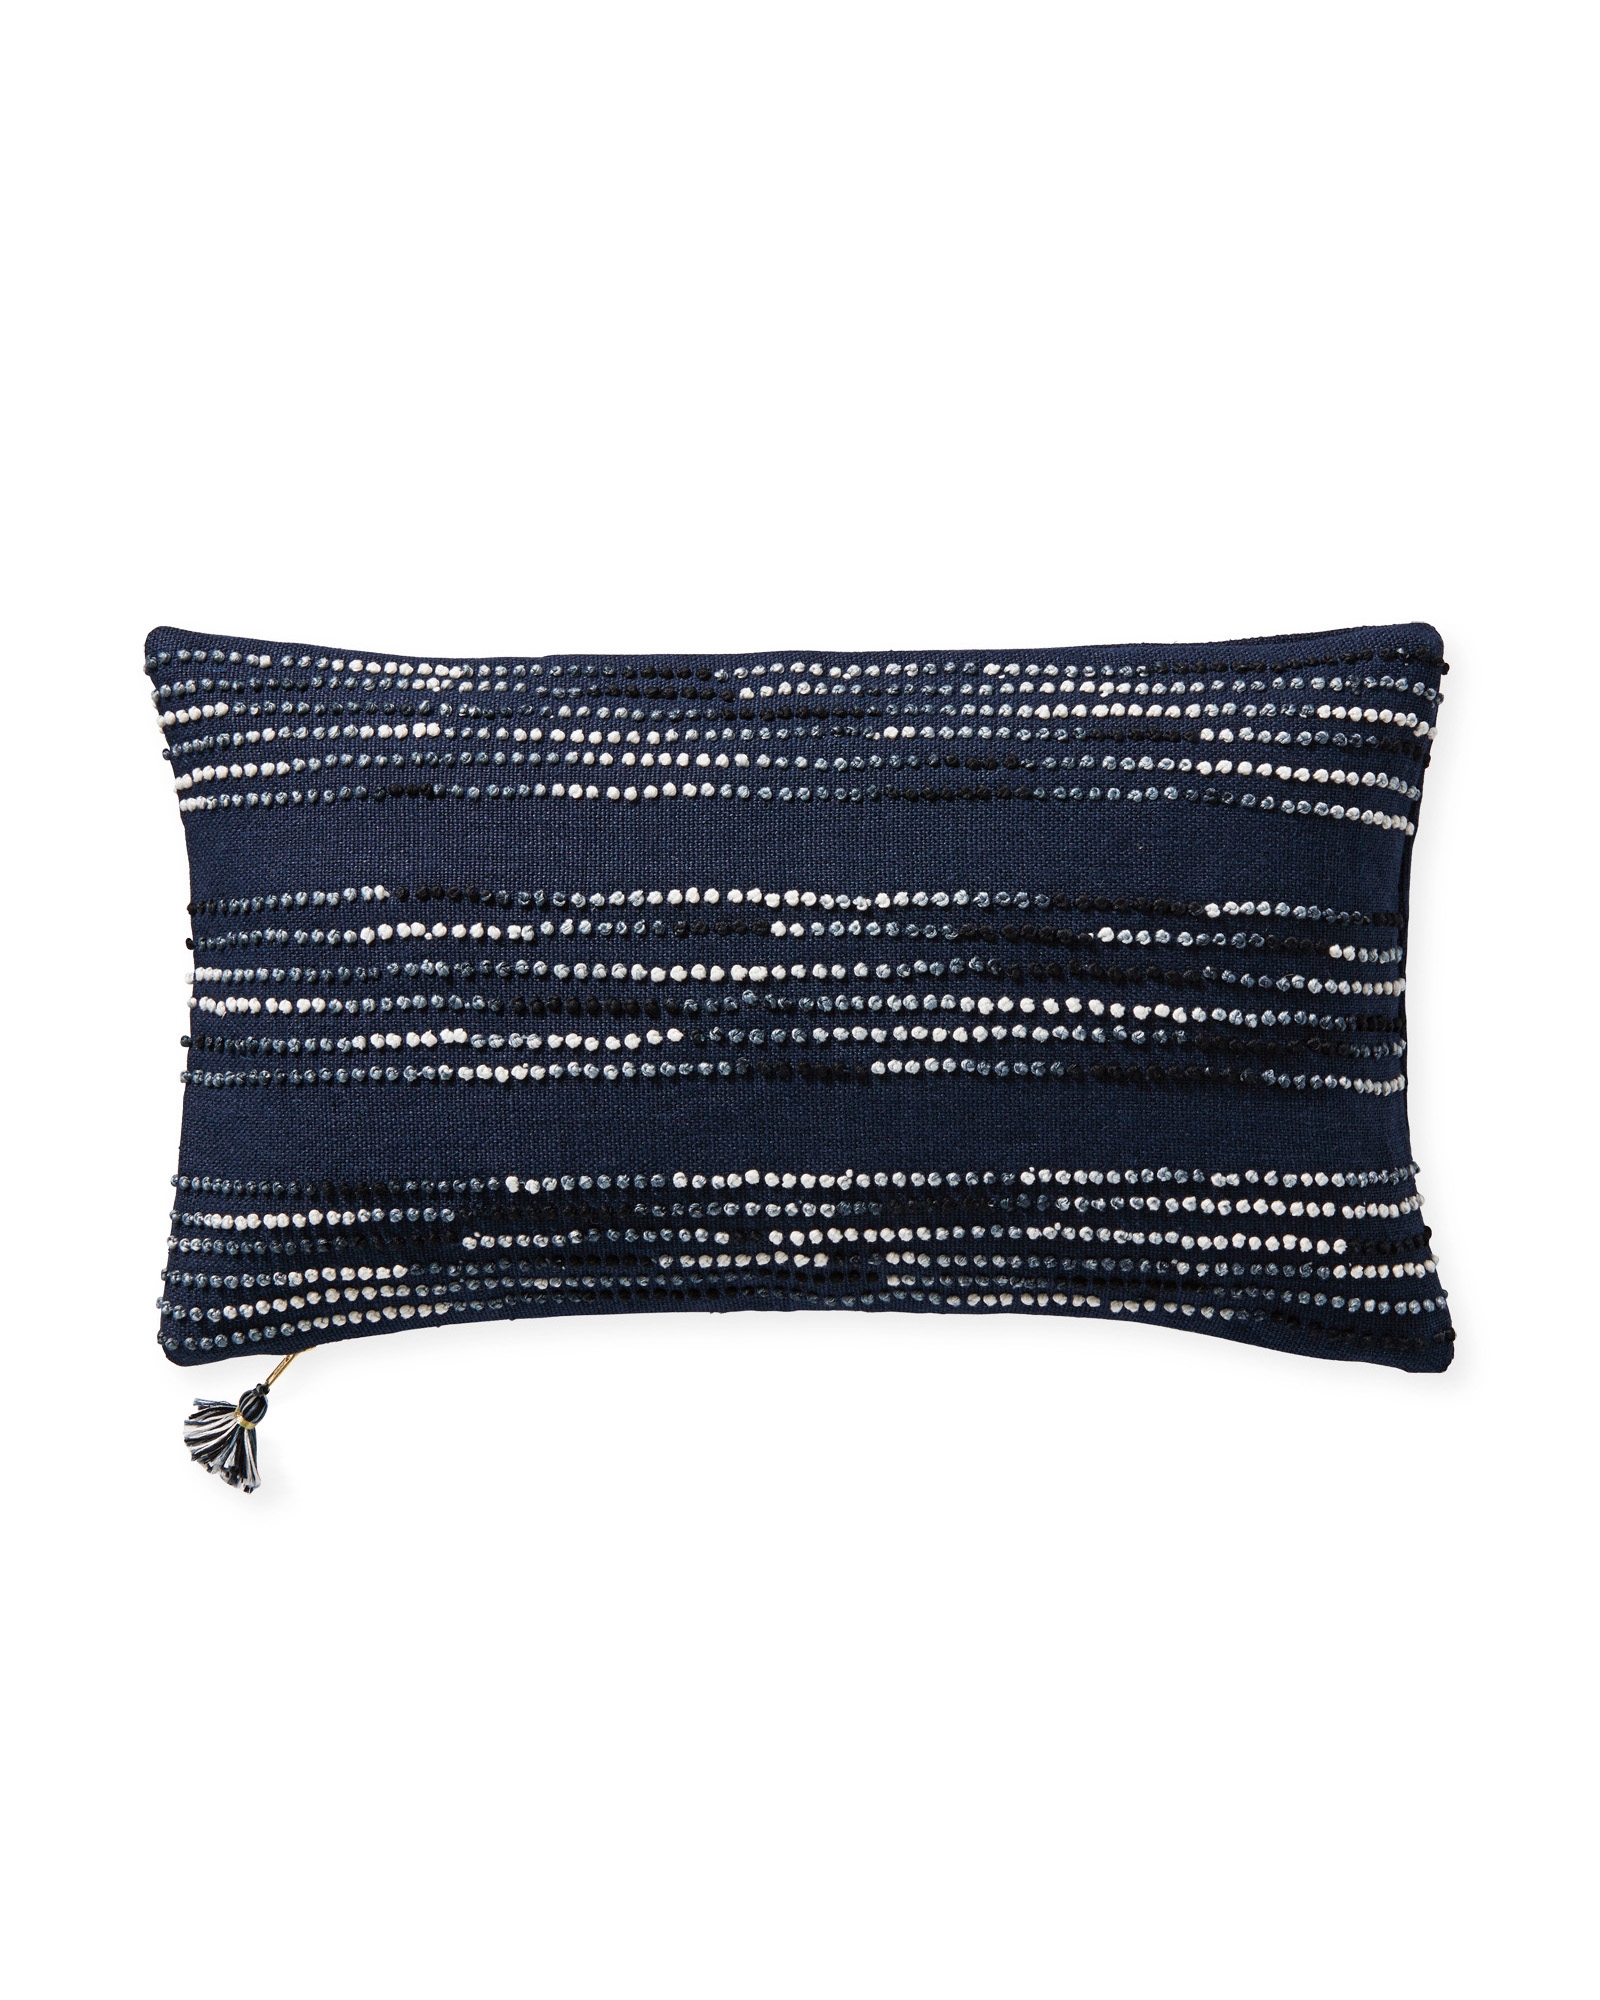 Pryce 12" x 21" Pillow Cover - Navy - Insert sold separately - Image 0